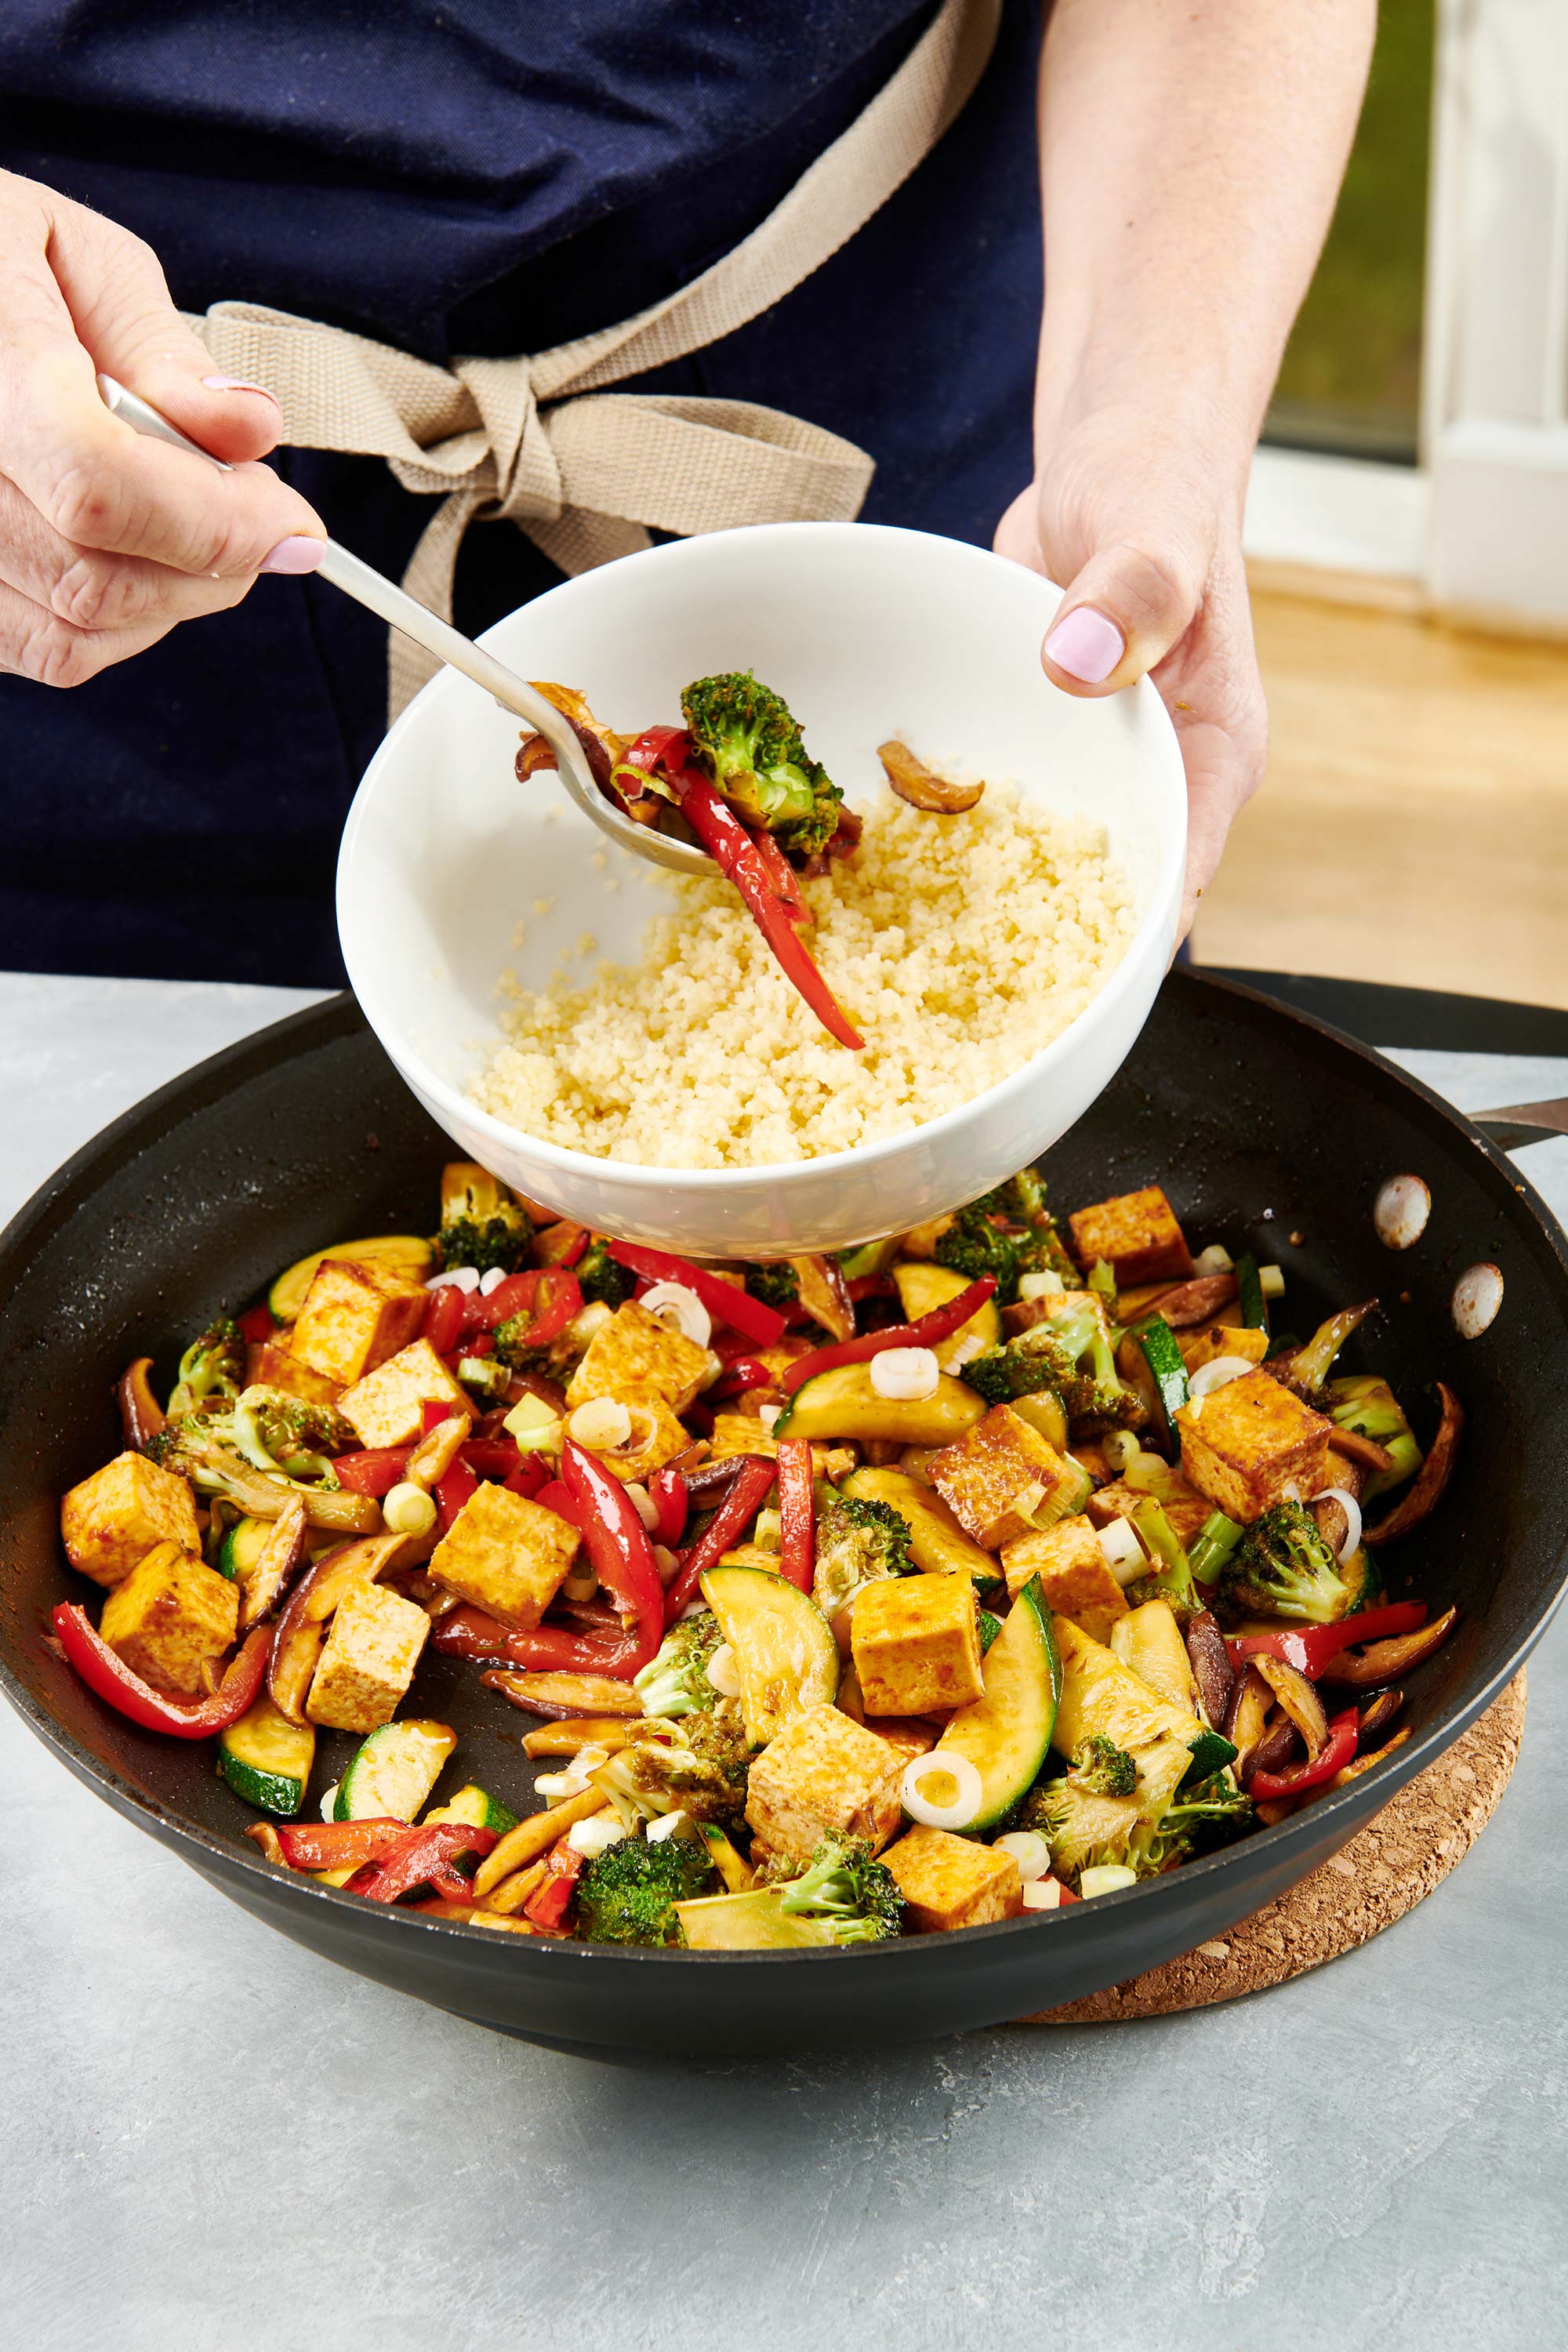 Woman putting Stir Fried Crispy Tofu and Vegetables into a bowl of rice.